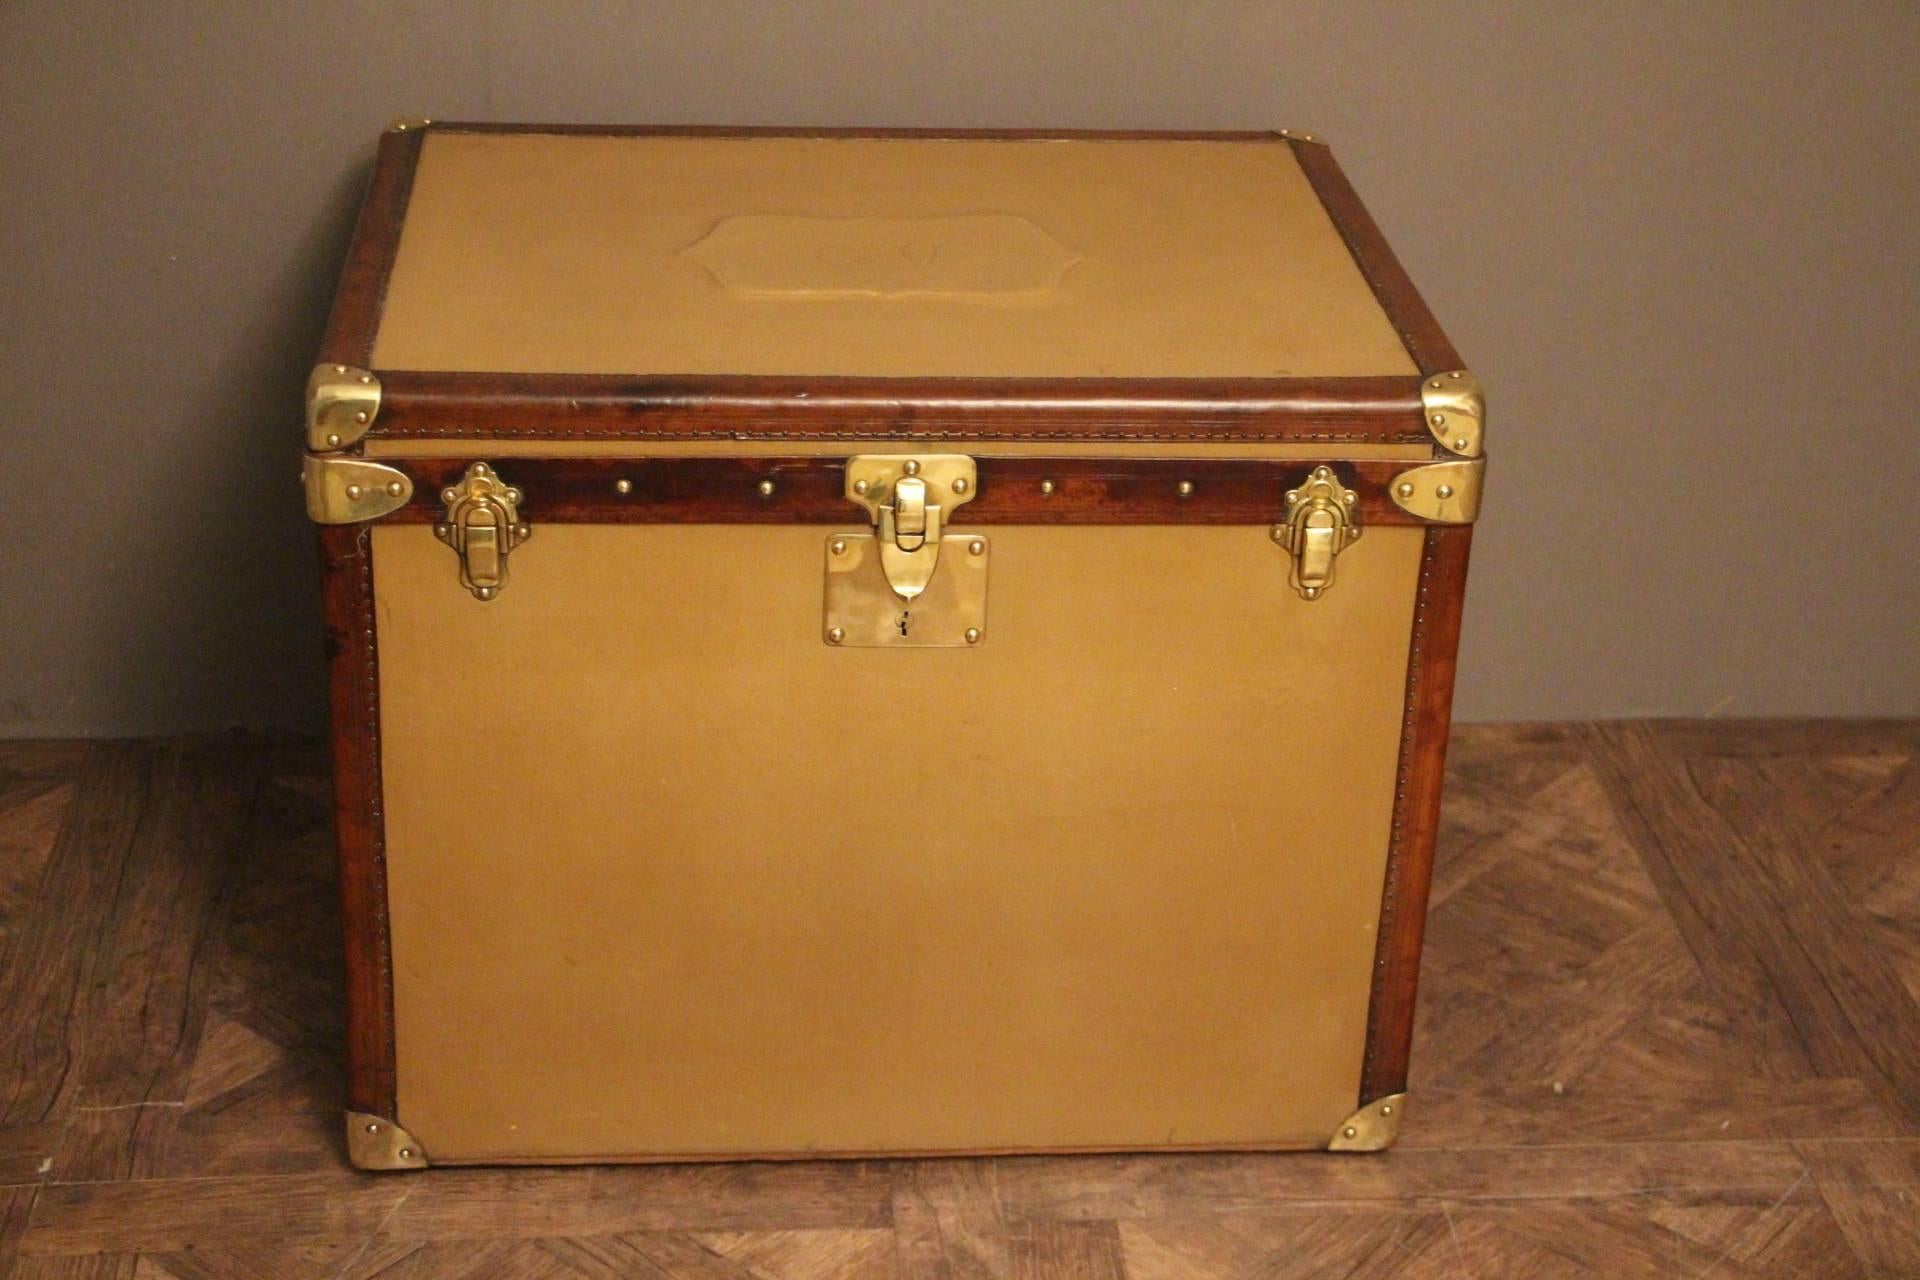 This gorgeous steamer trunk features a beautiful golden beige canvas, leather trim as well as solid brass fittings: side handles, locks, corners and studs. On the top, there is a kind of plaque covered with canvas showing the initials: G.V
Its